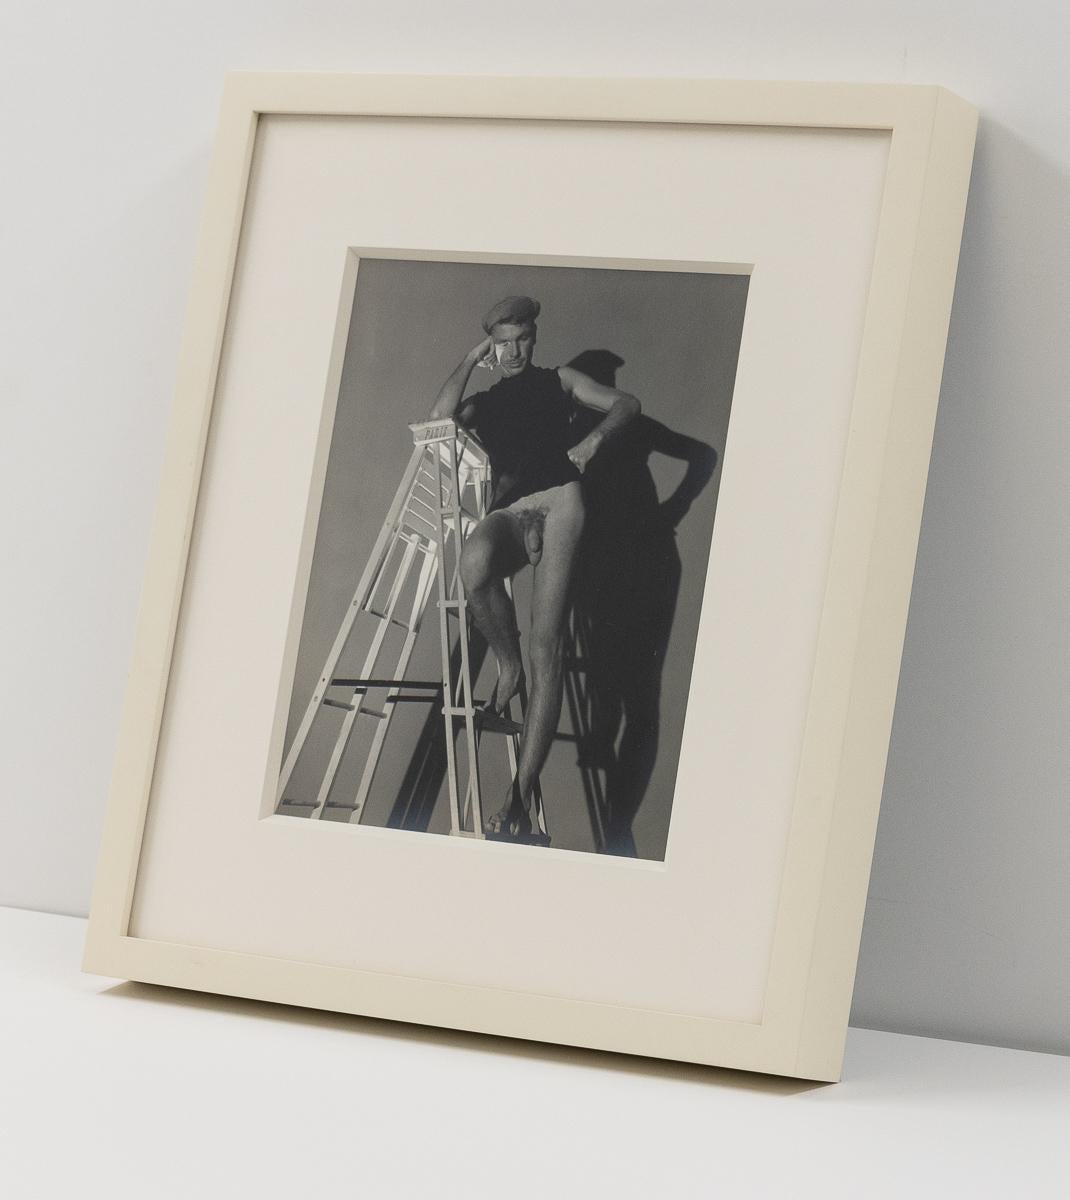 Jared French on Ladder
c. 1940s

Stamped “George Platt Lynes 640 Madison Avenue, New York” in black ink, verso

Gelatin silver print

9.25 x 7.5 inches, image

Contact gallery for price.

This work is offered by ClampArt in New York City.